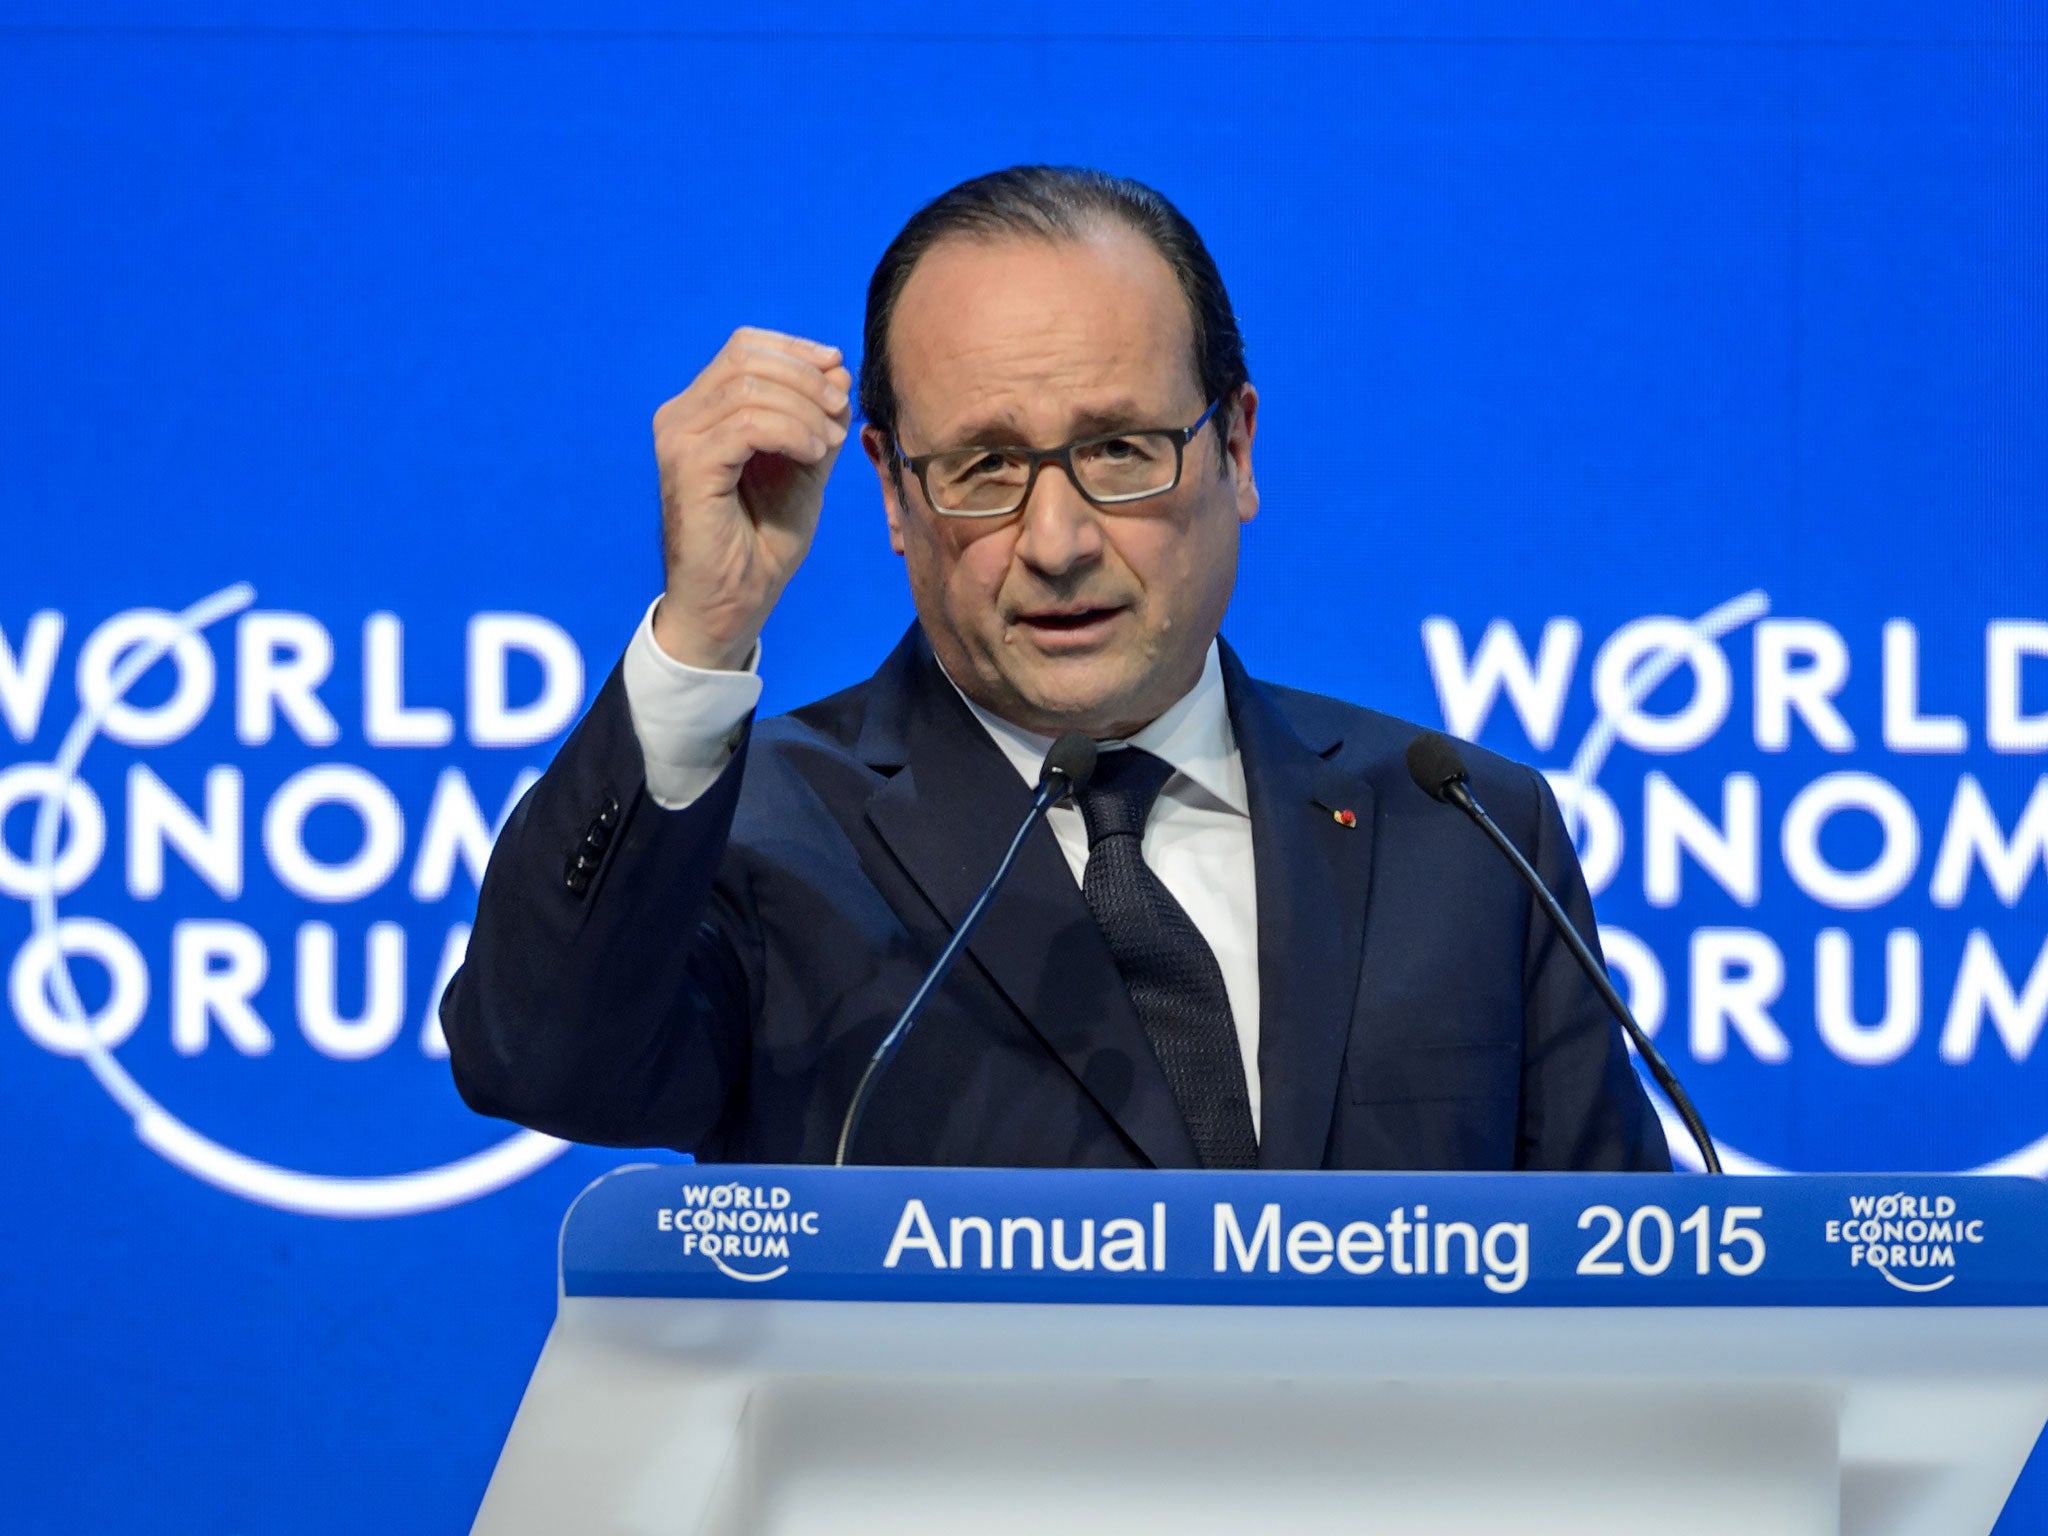 French President Francois Hollande gestures during a speech at the World Economic Forum (WEF) annual meeting on 23 January, 2015, in Davos, Switzerland